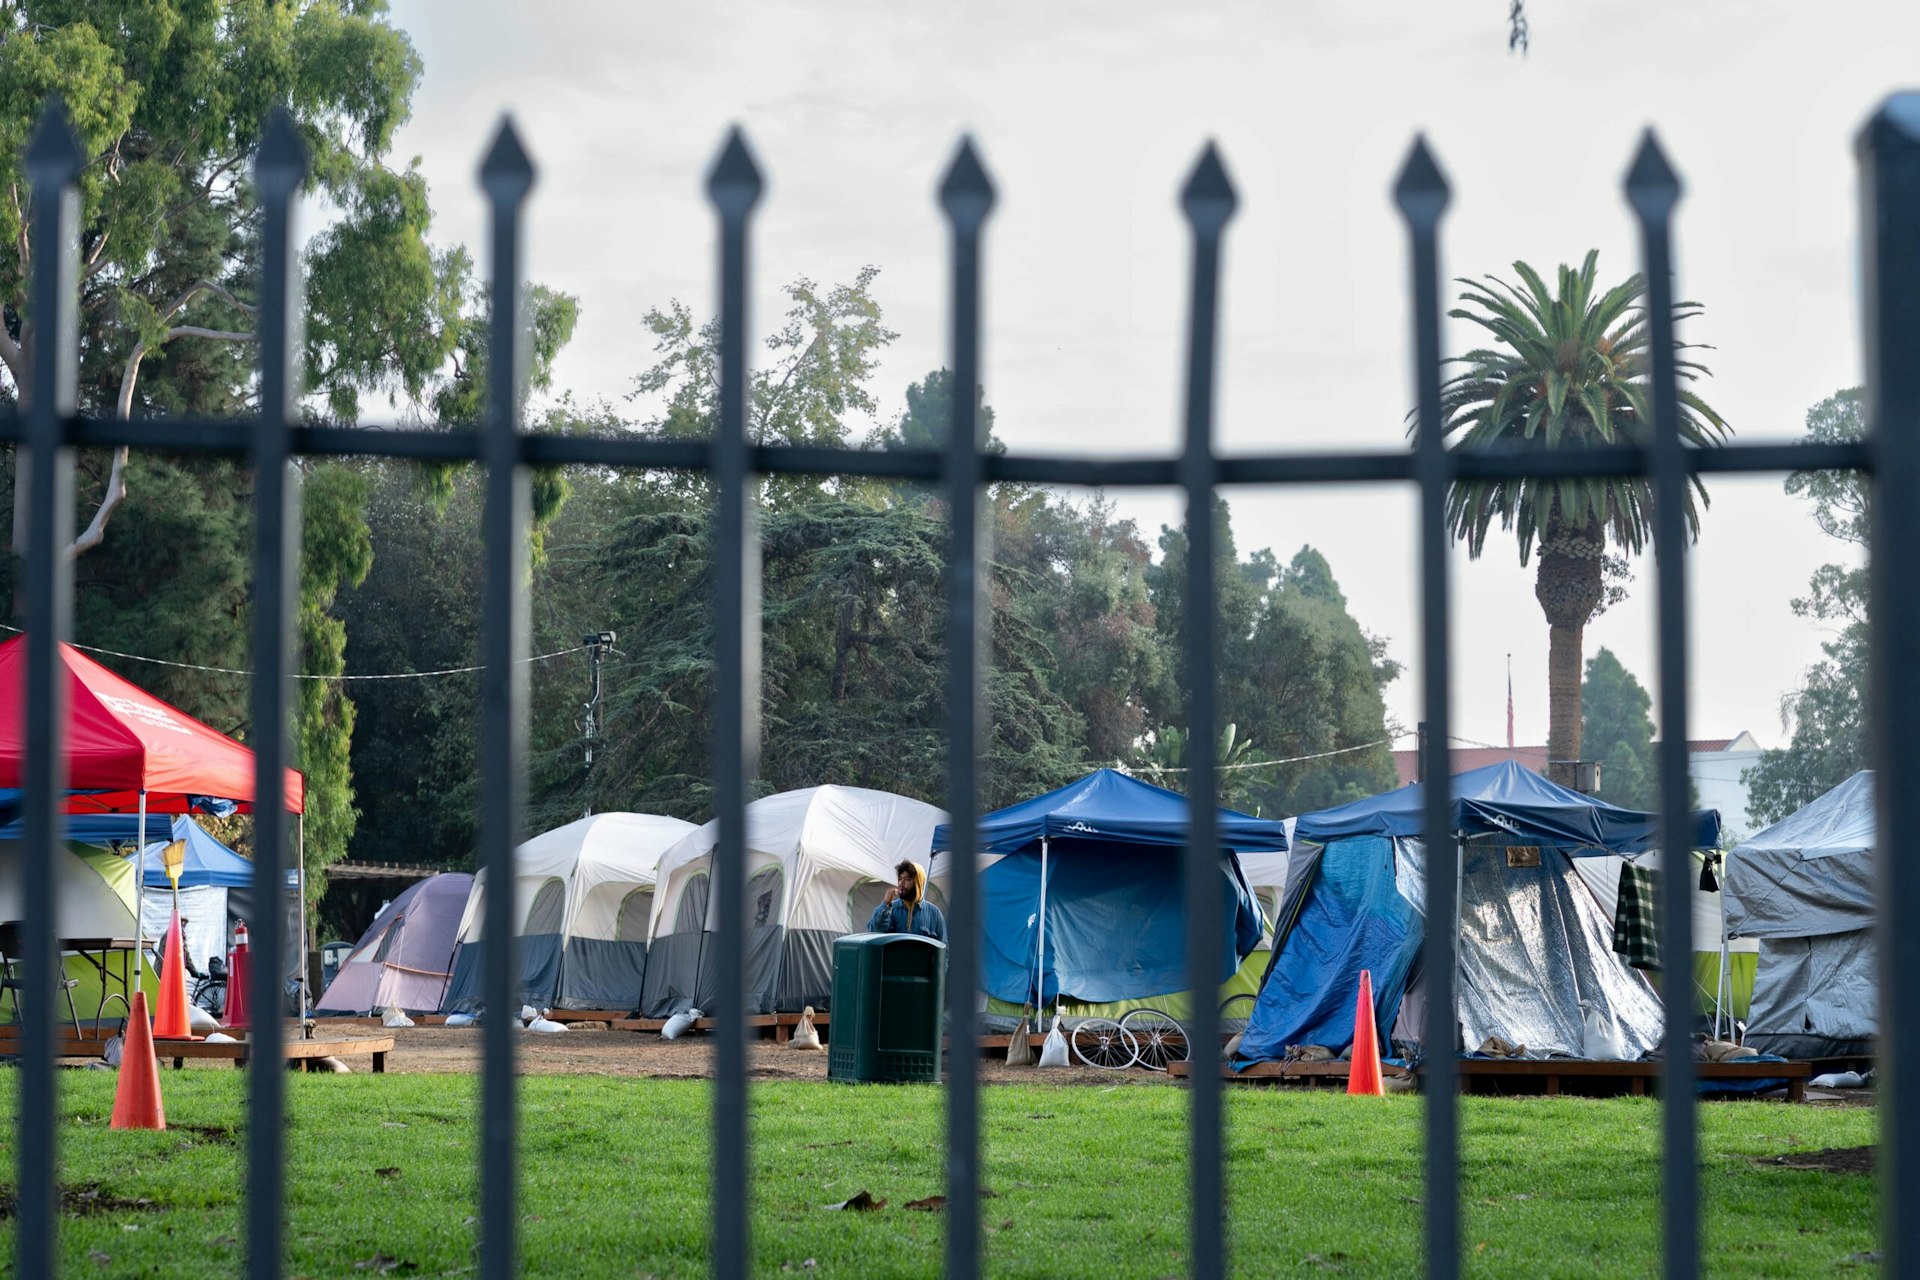 Several homeless encampment tents are seen through the fence of the VA facility in Los Angeles.